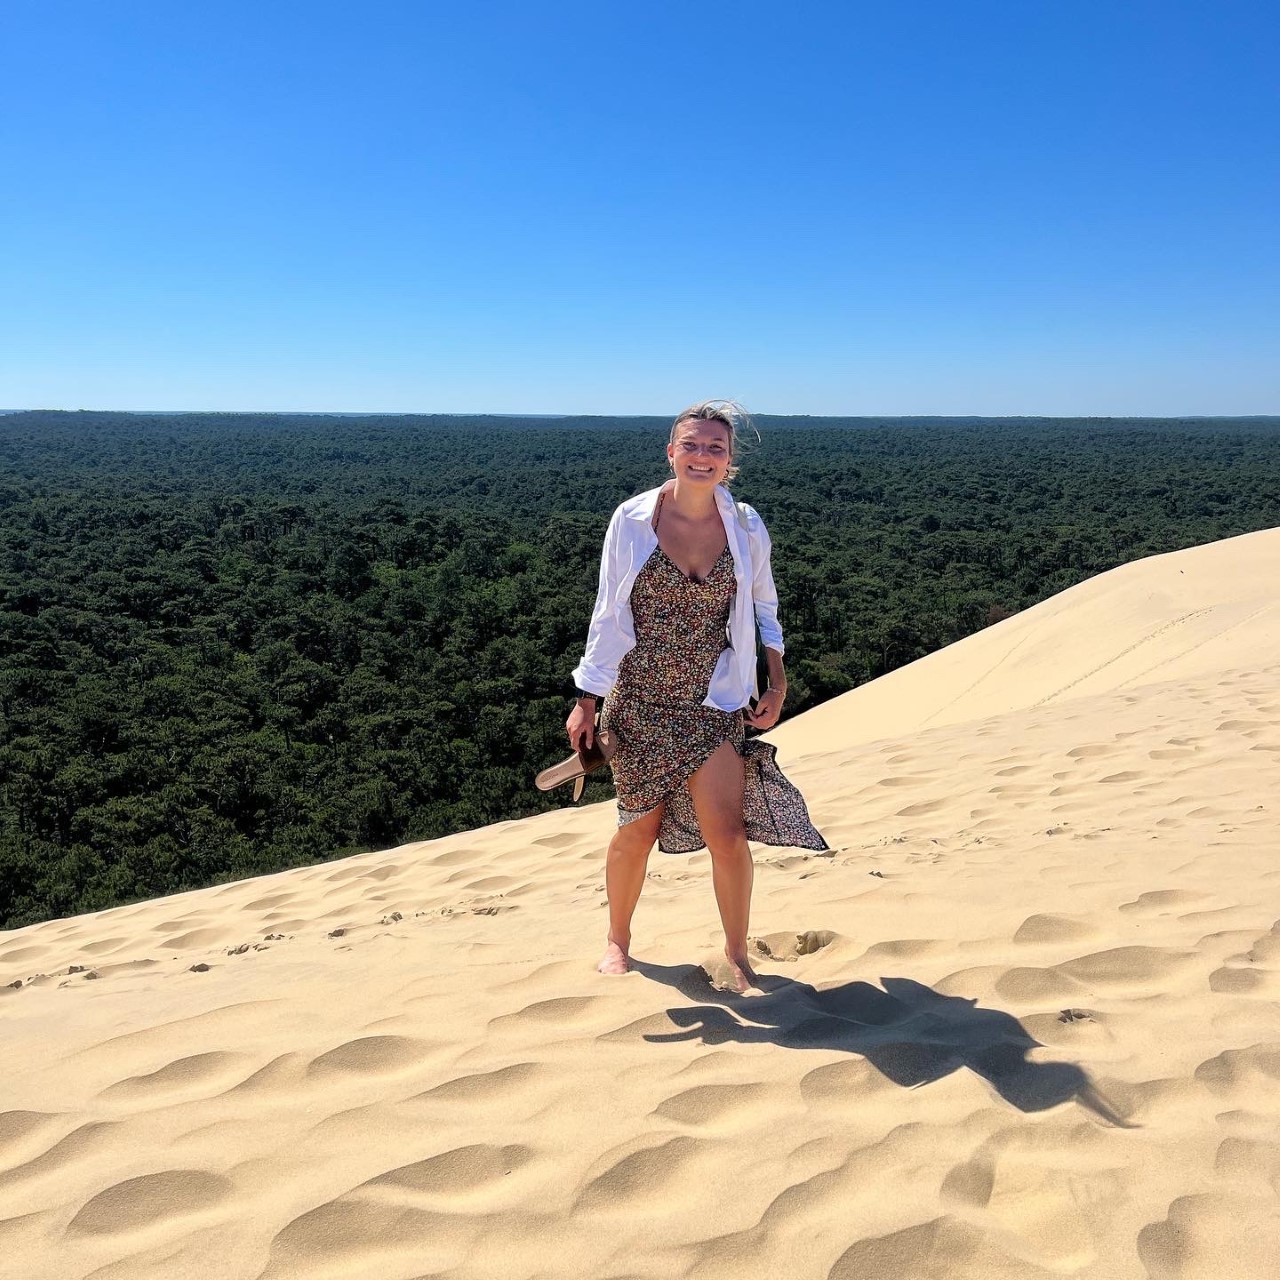 Dune du pilat, about 2 hours from Pau, where my host mom kindly took me for a weekend trip